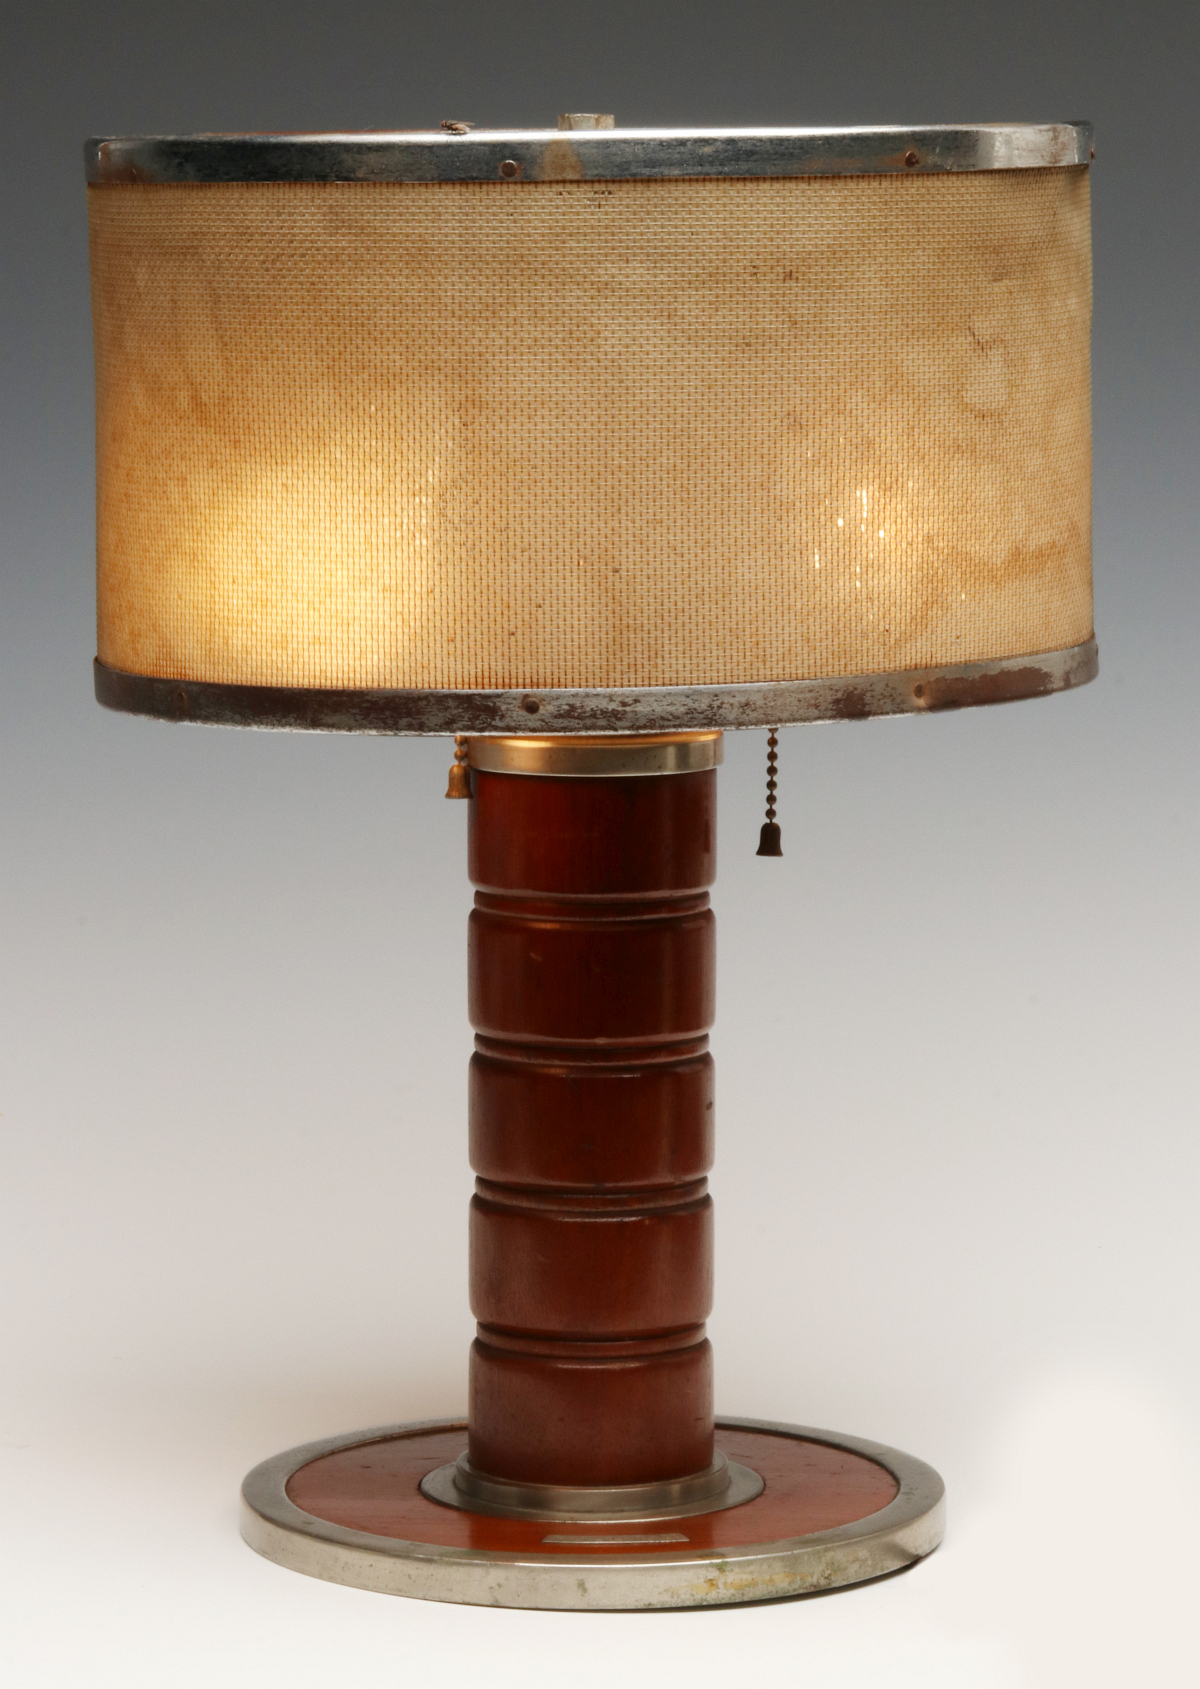 A PULLMAN TABLE LAMP ATTRIBUTED TO THE MARYLAND CLUB